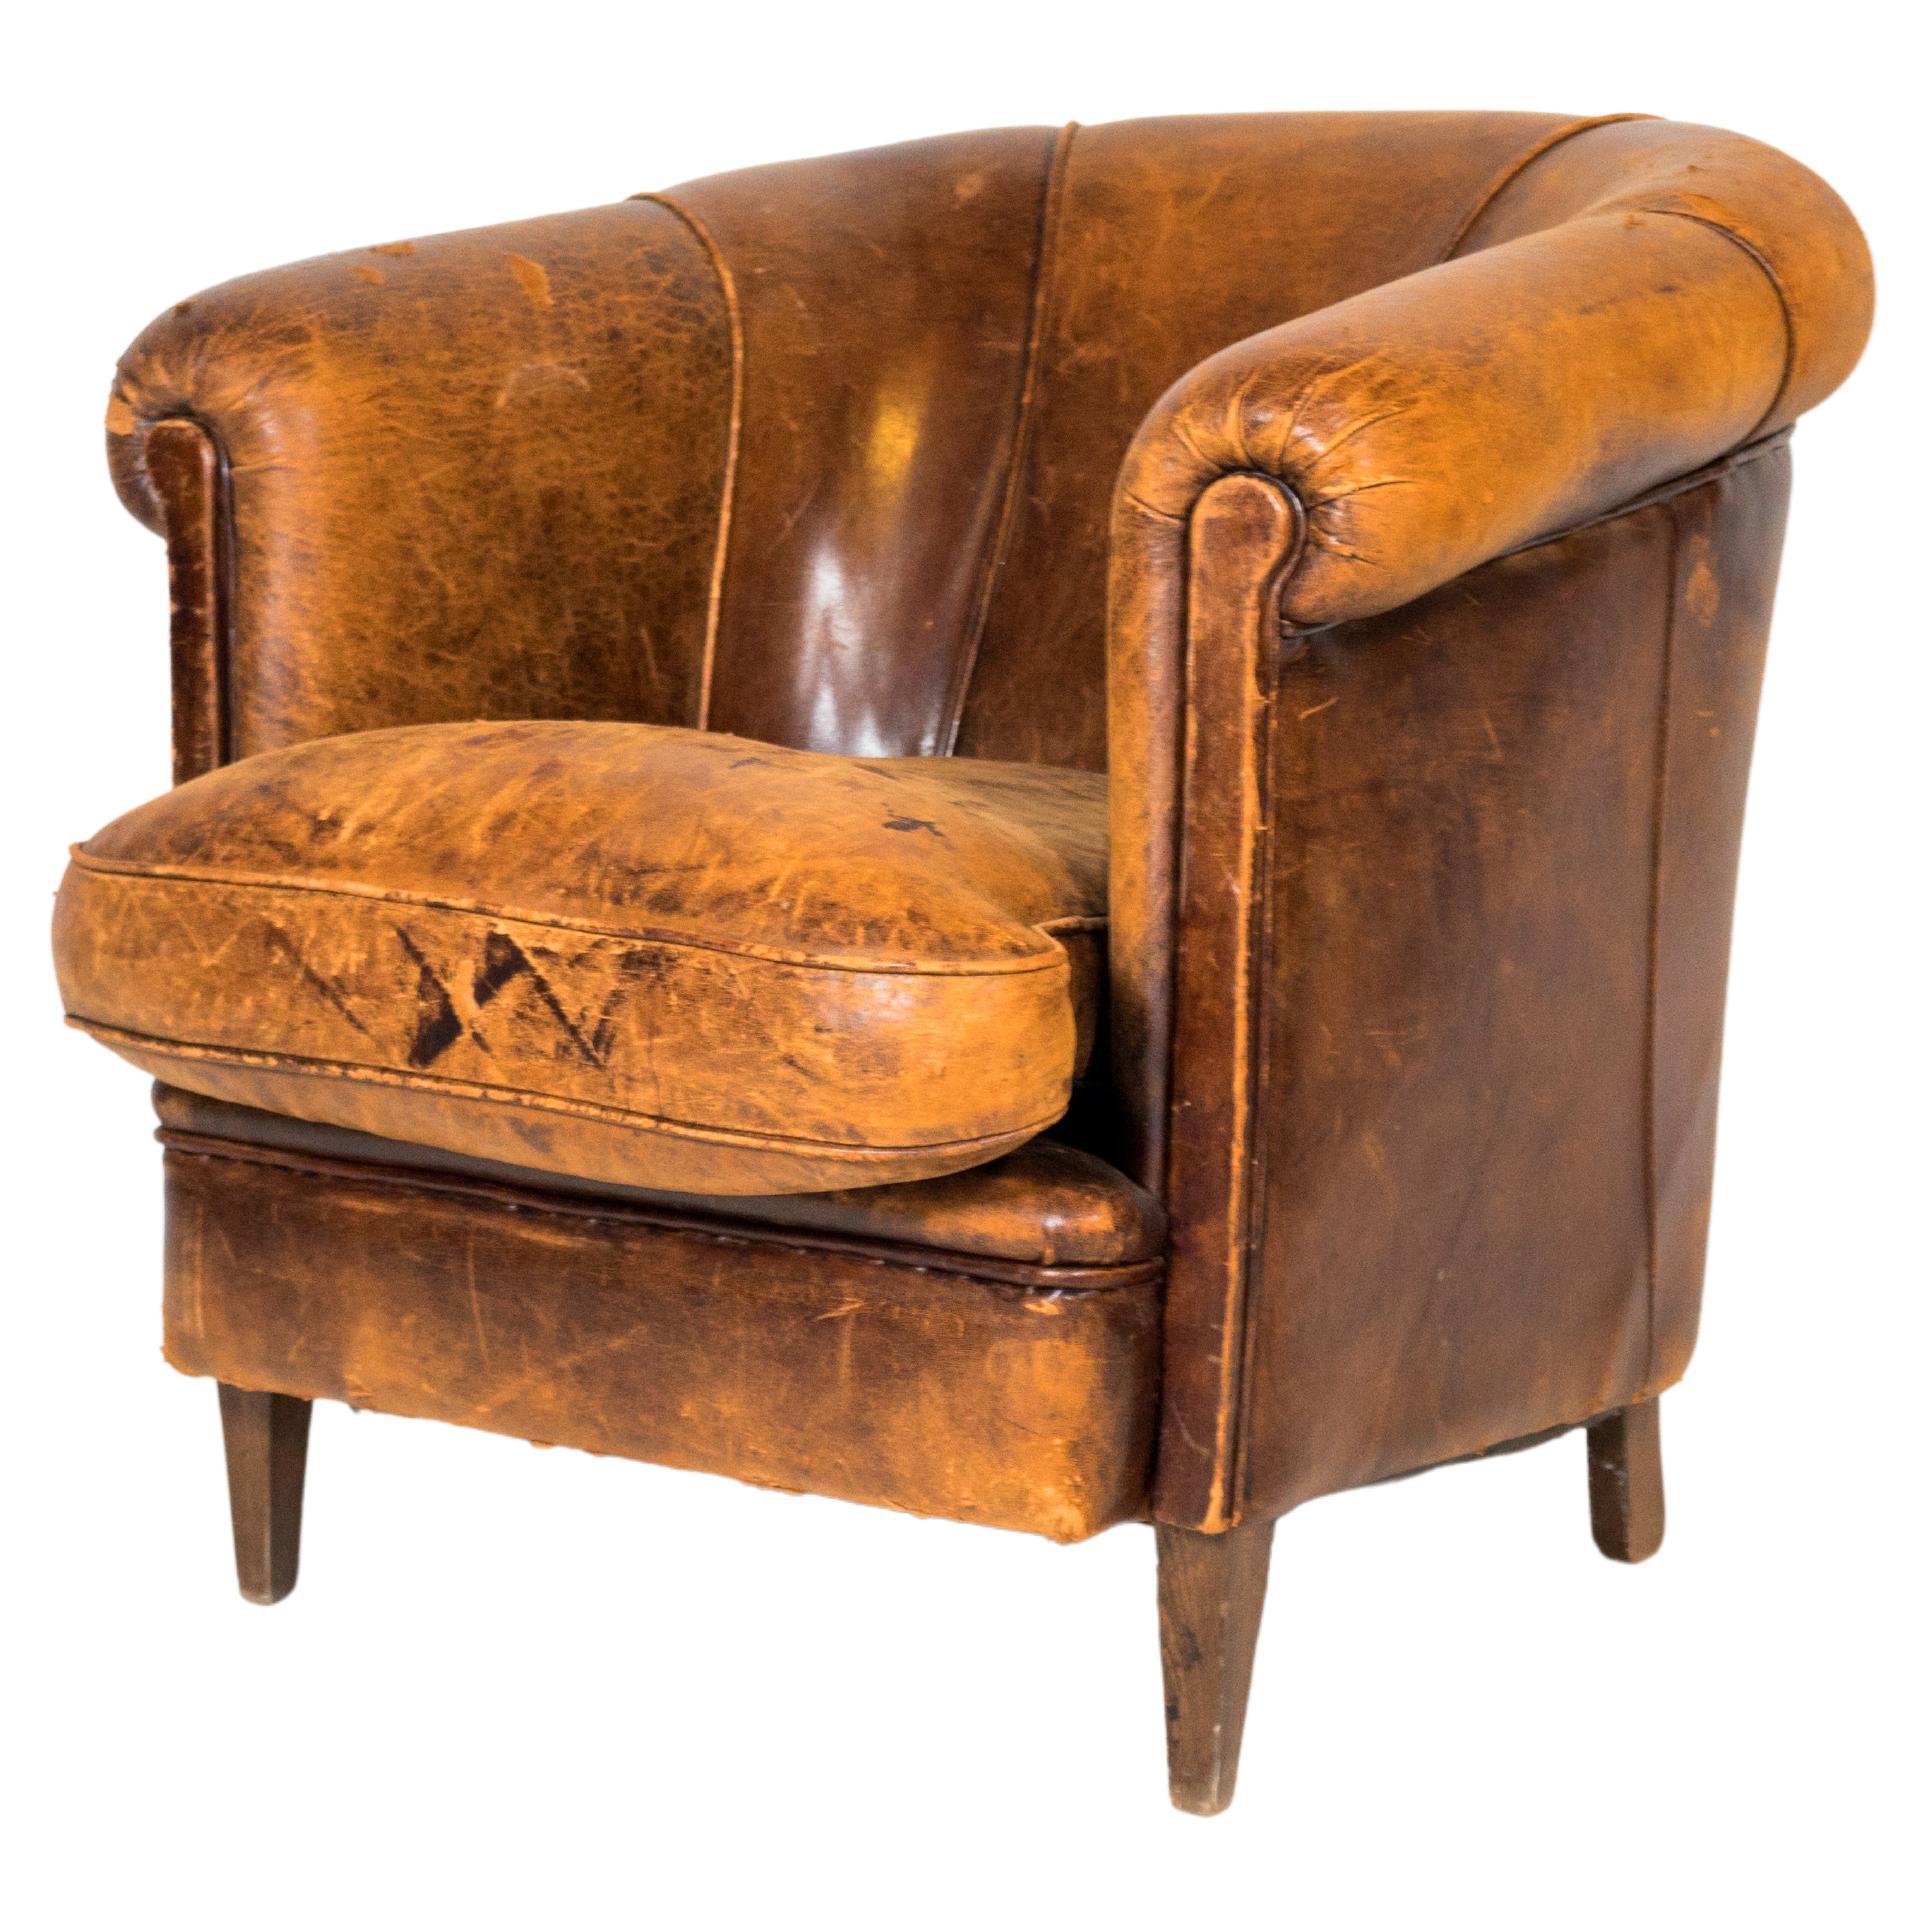 1970s Vintage Art Deco Distressed Leather Club Chair For Sale